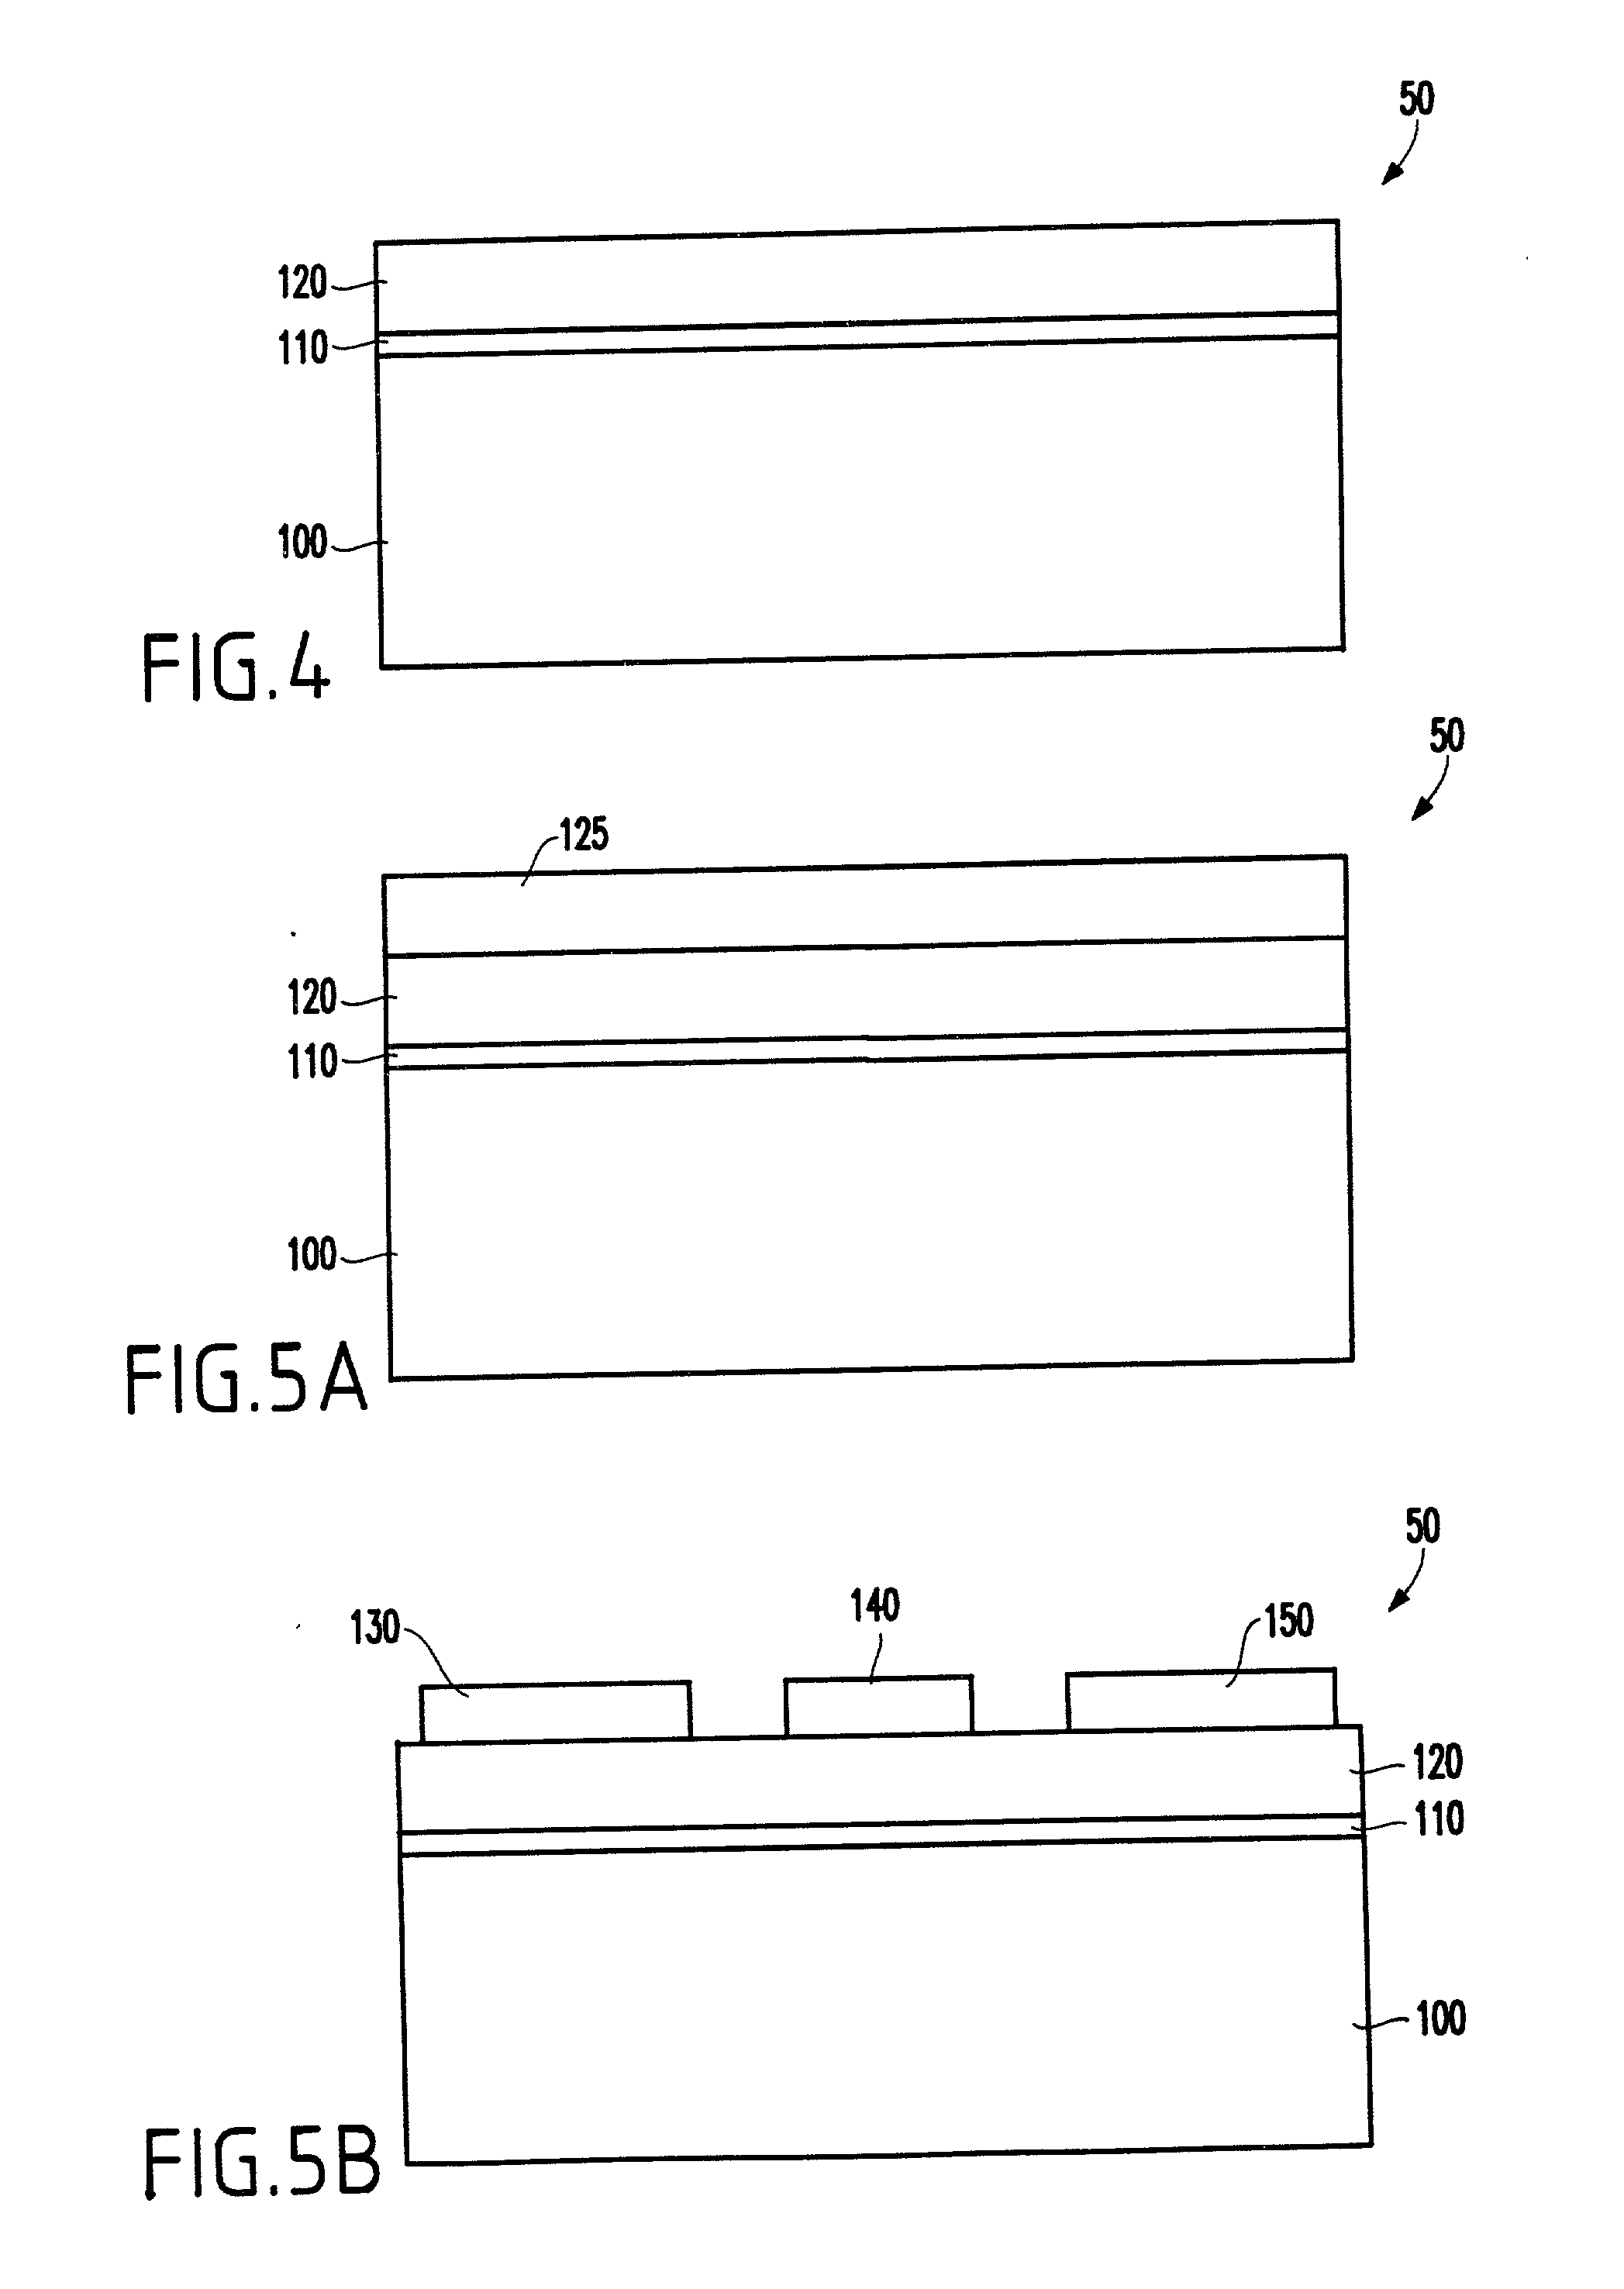 Method of forming a planar polymer transistor using substrate bonding techniques